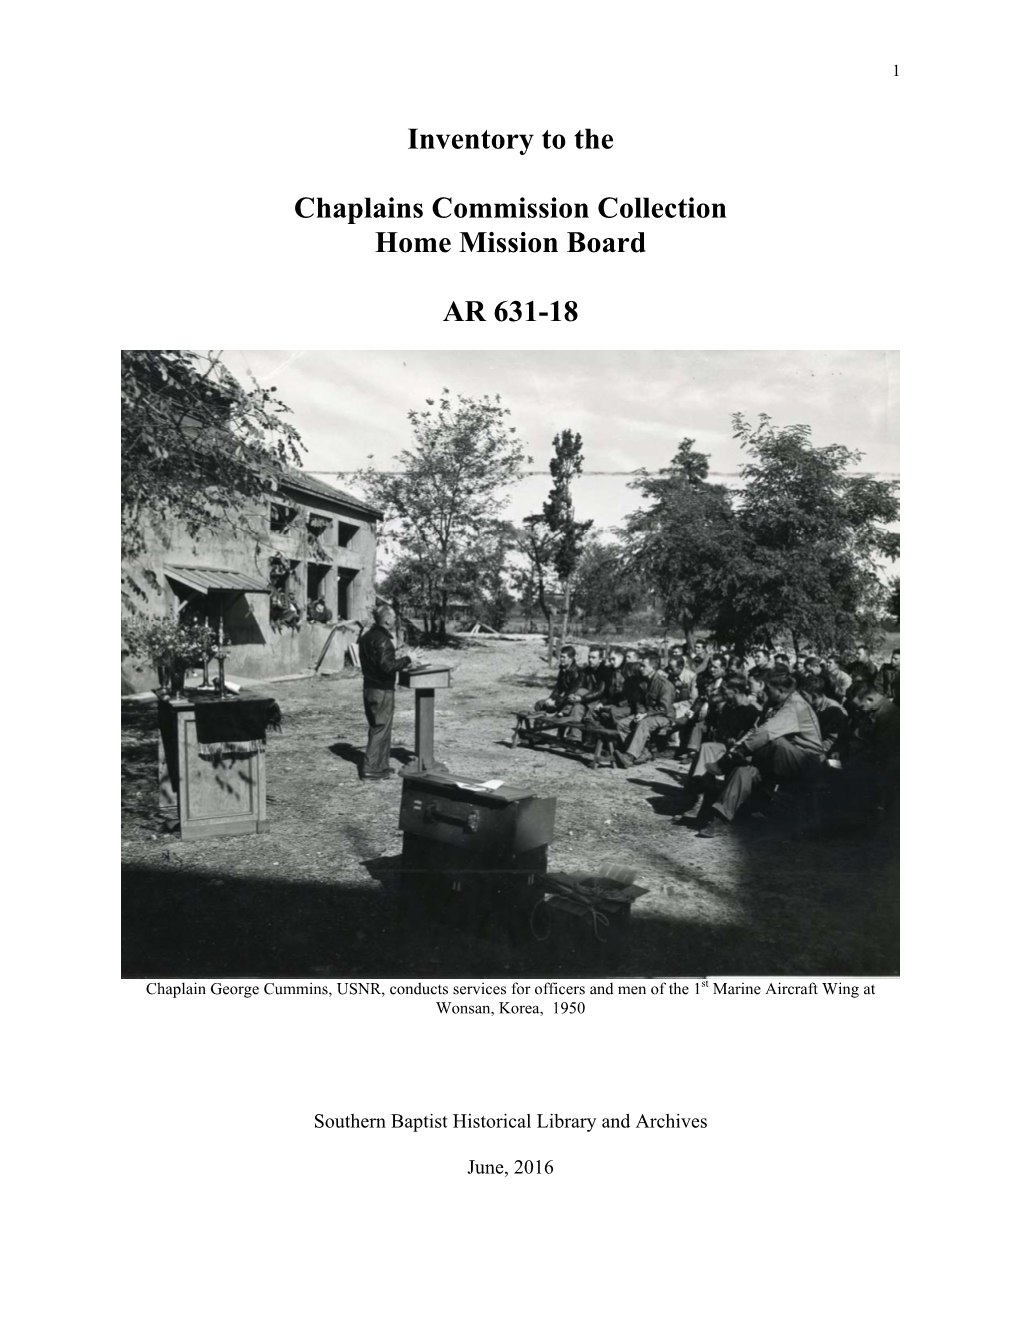 Inventory to the Chaplains Commission Collection Home